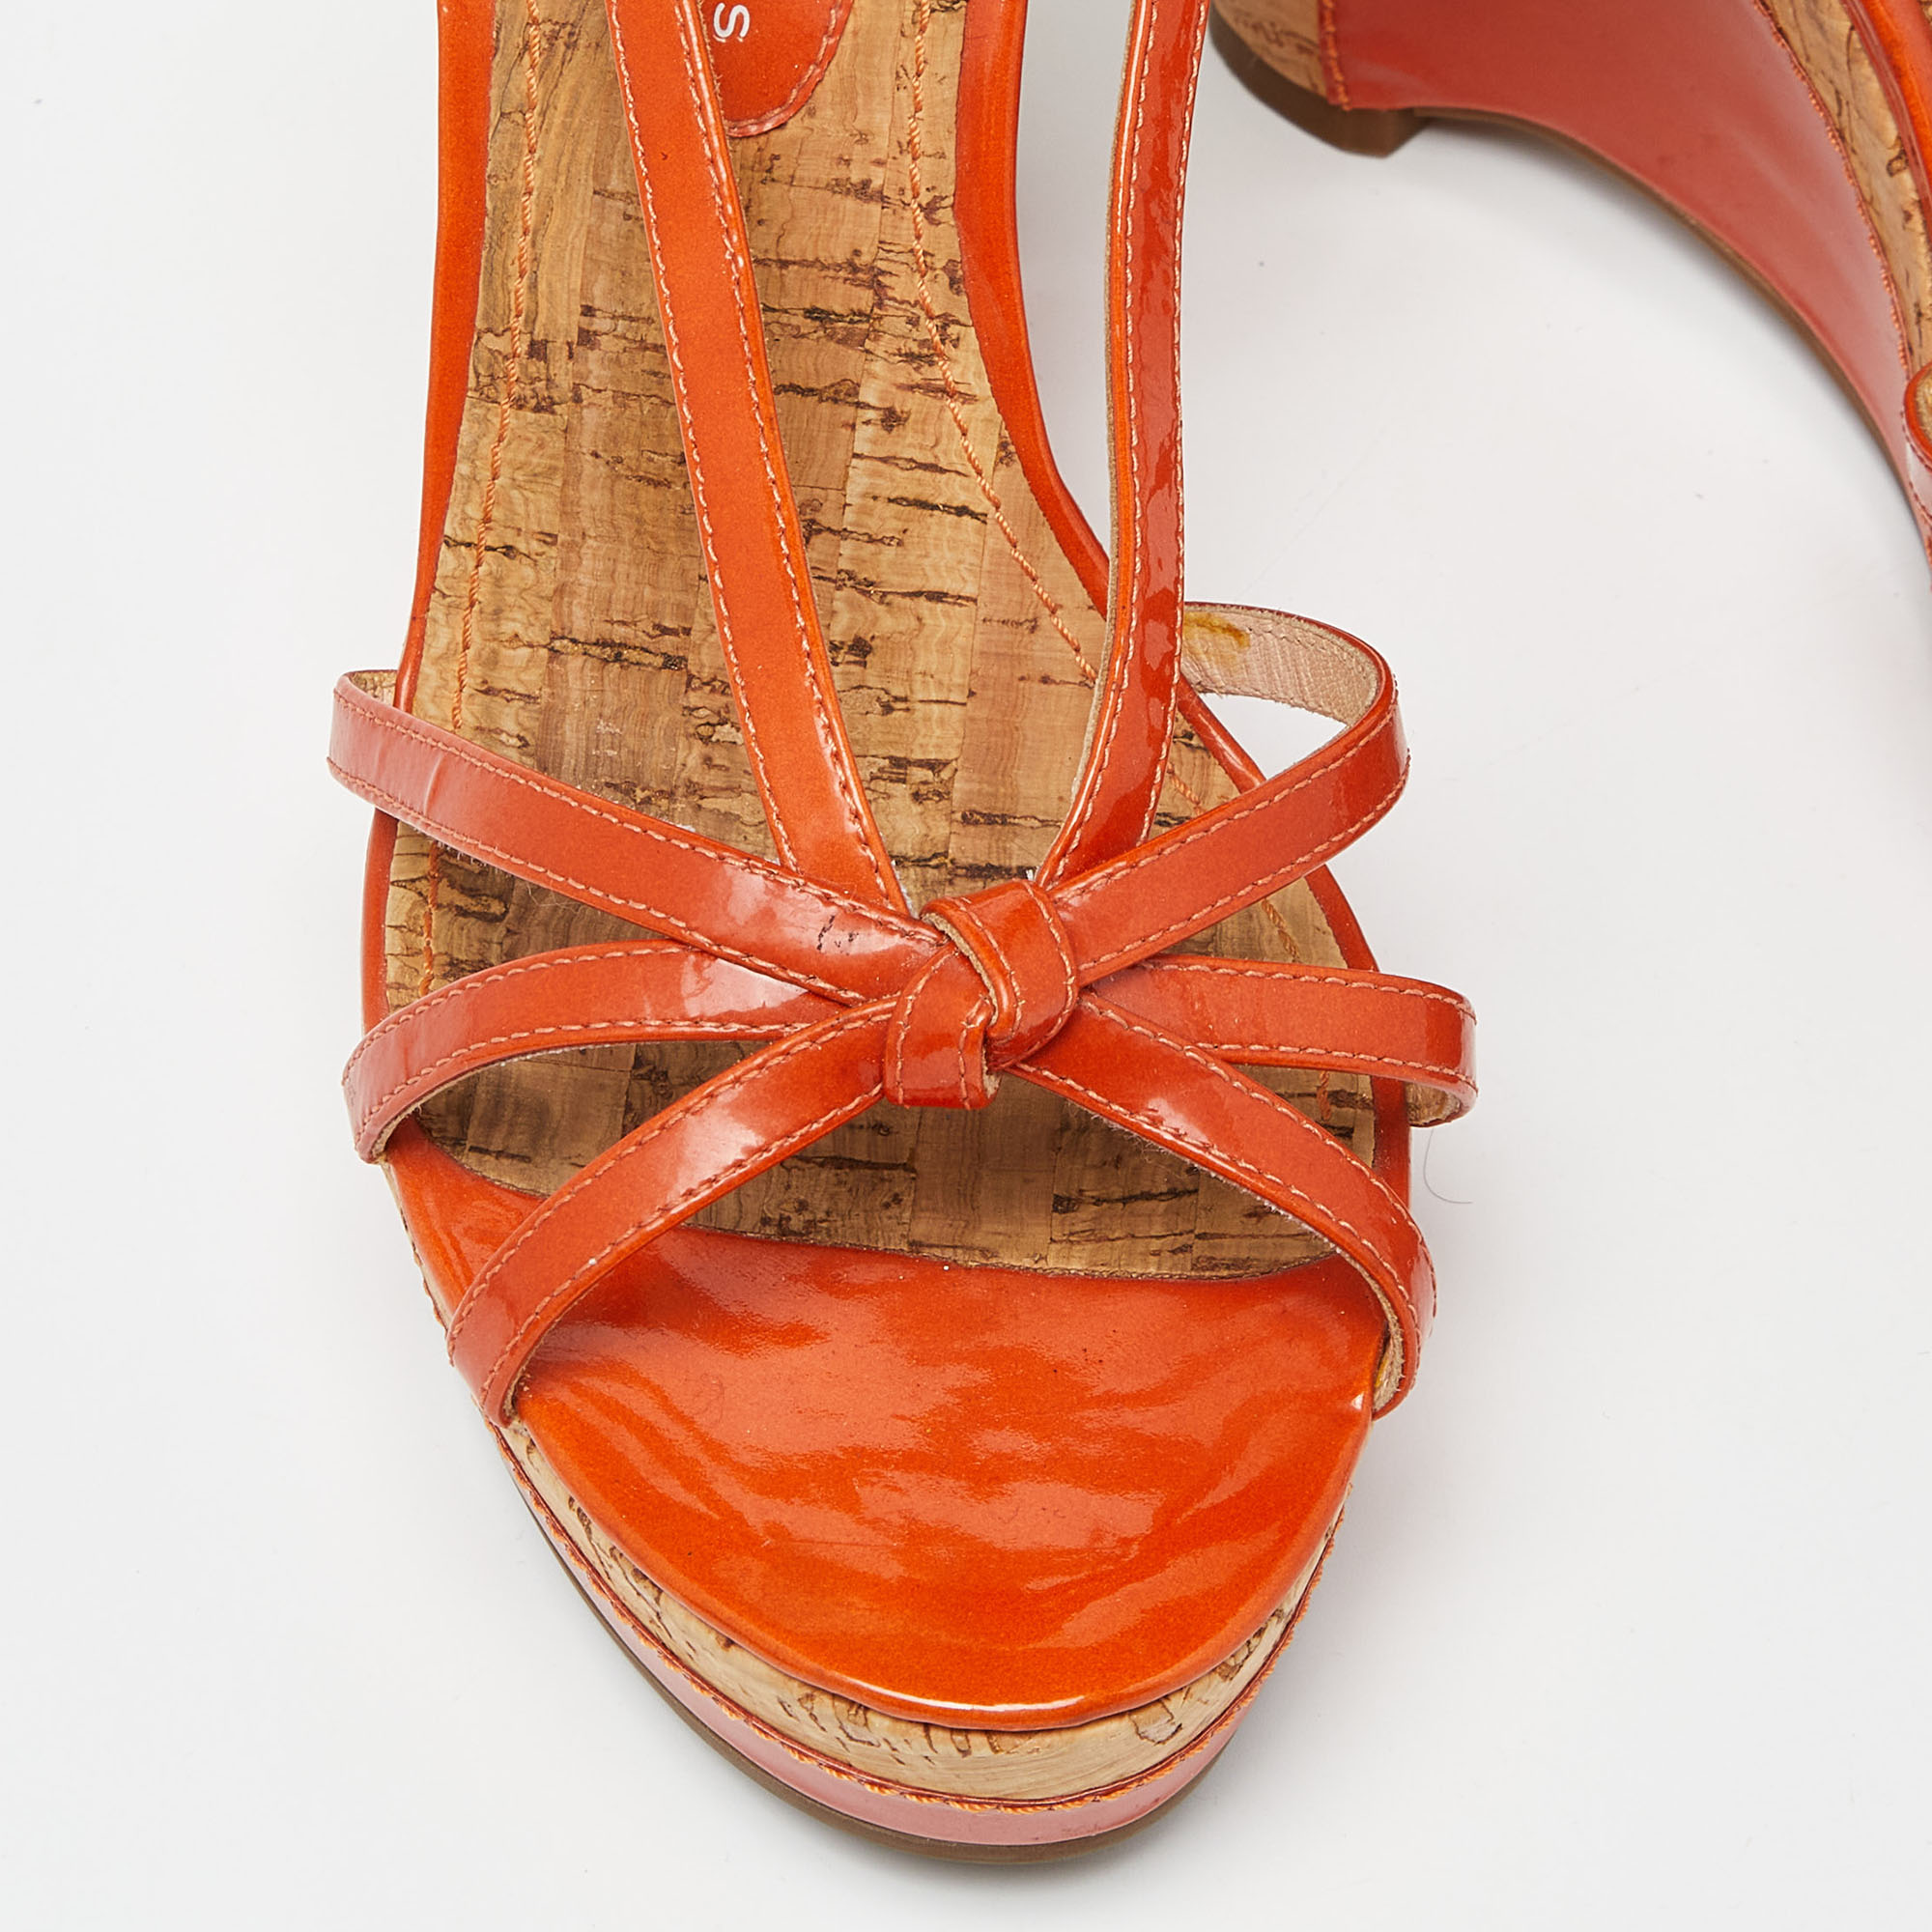 Marc By Marc Jacobs Orange Patent Leather Cork Wedge Slingback Sandals Size 37.5